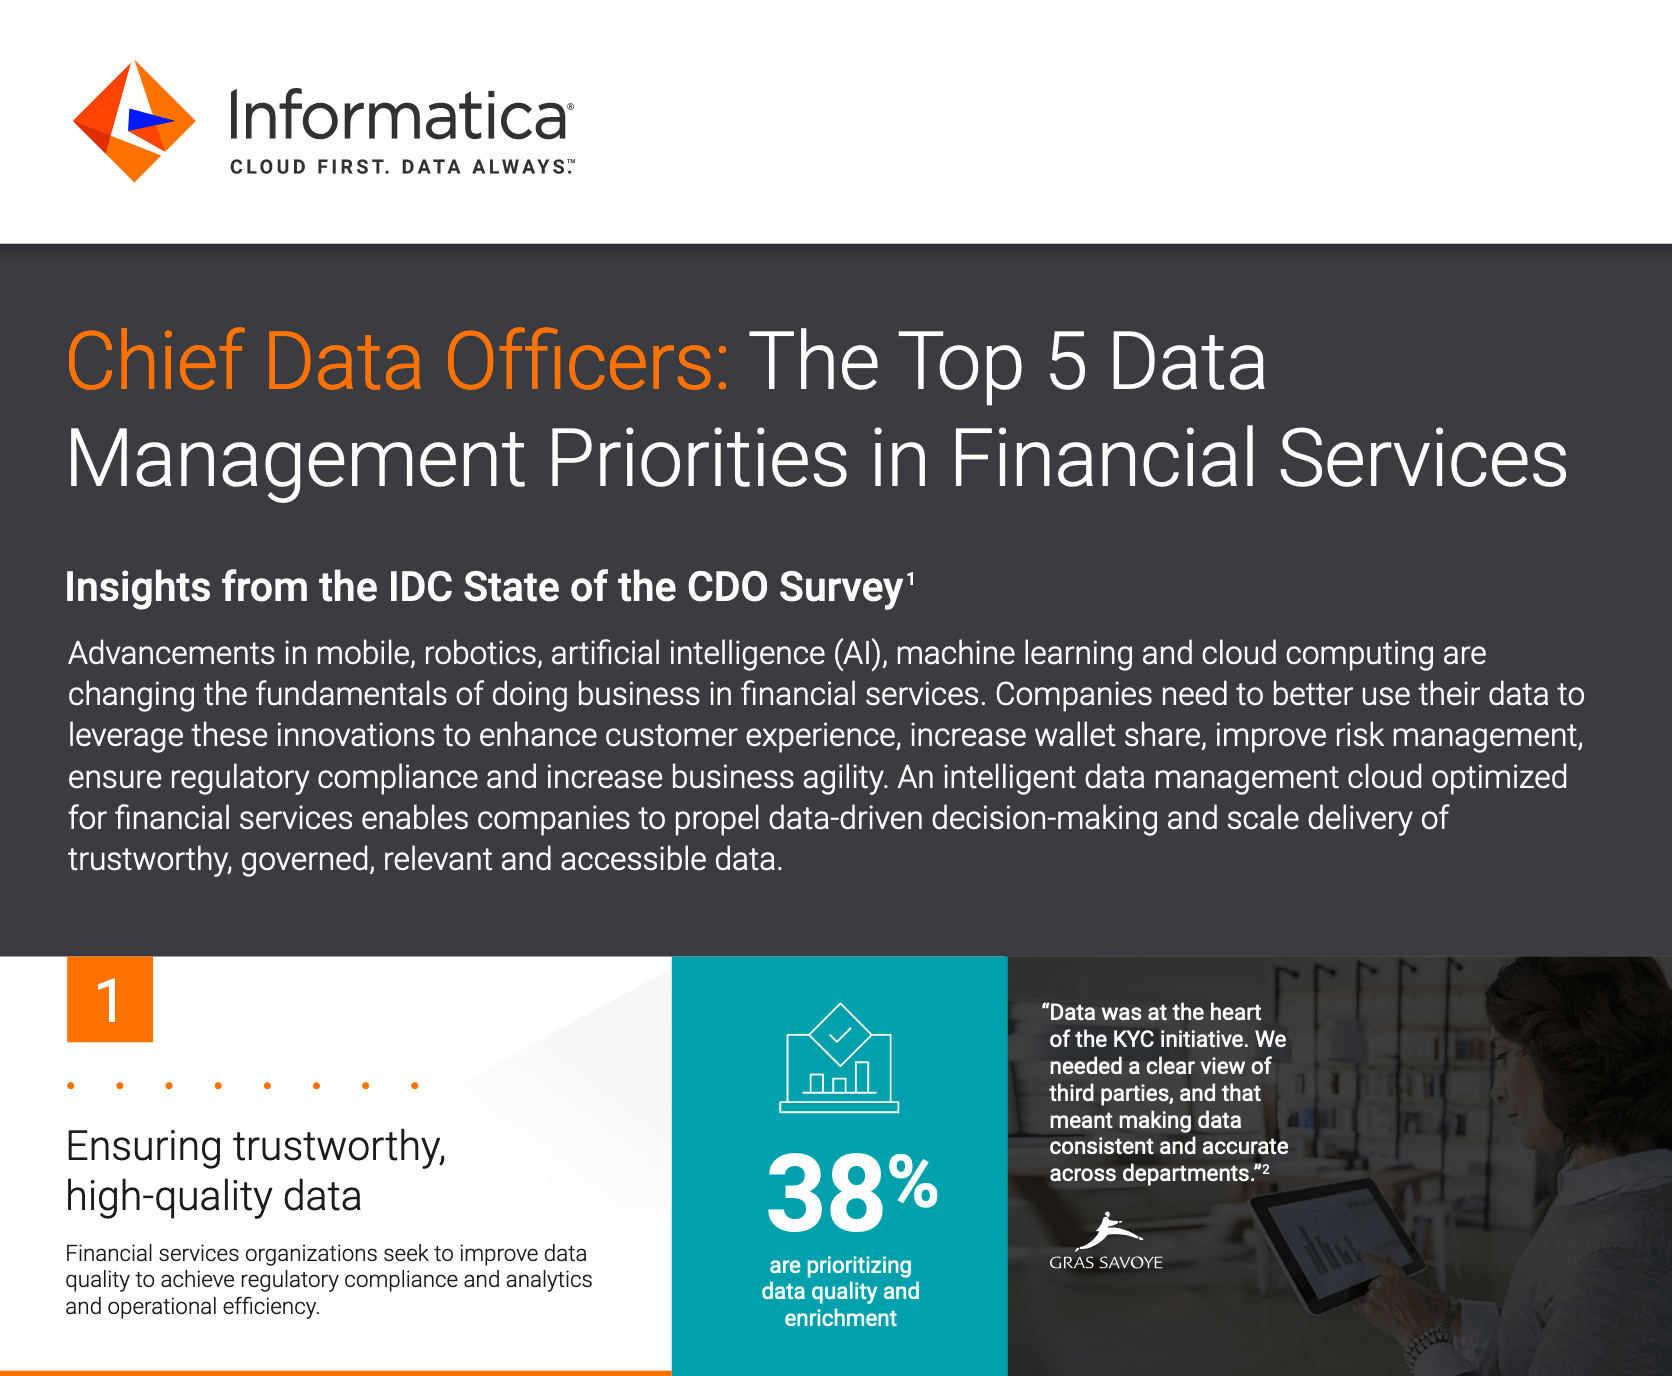 chief data officers - Chief Data Officers: The Top 5 Data Management Priorities in Financial Services